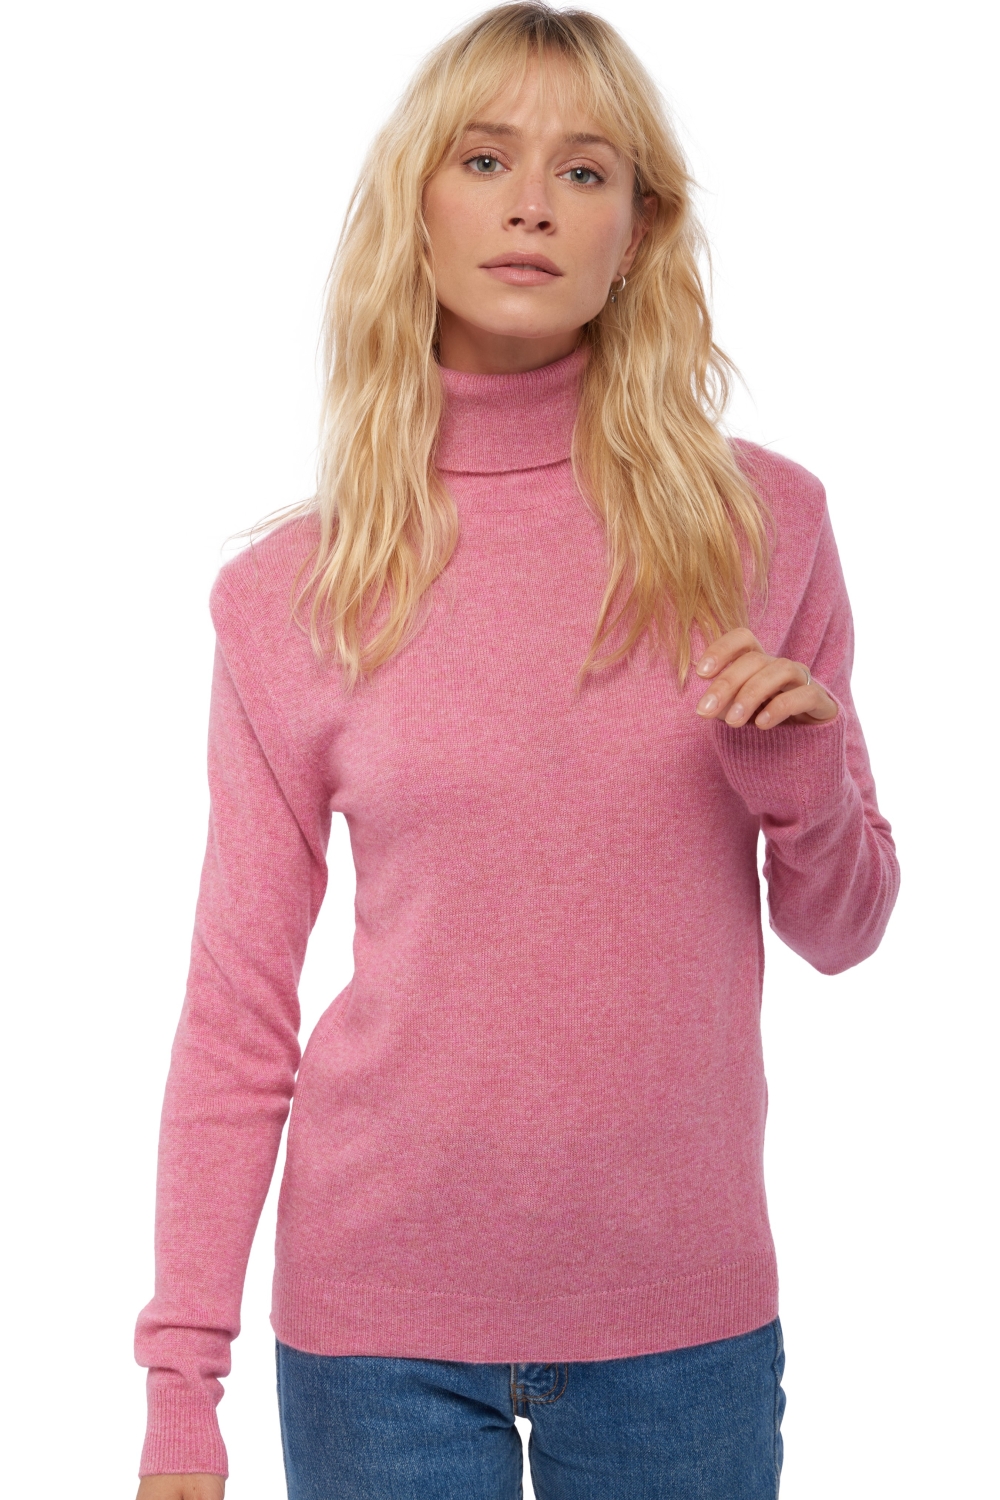 Cashmere ladies tale first carnation pink s